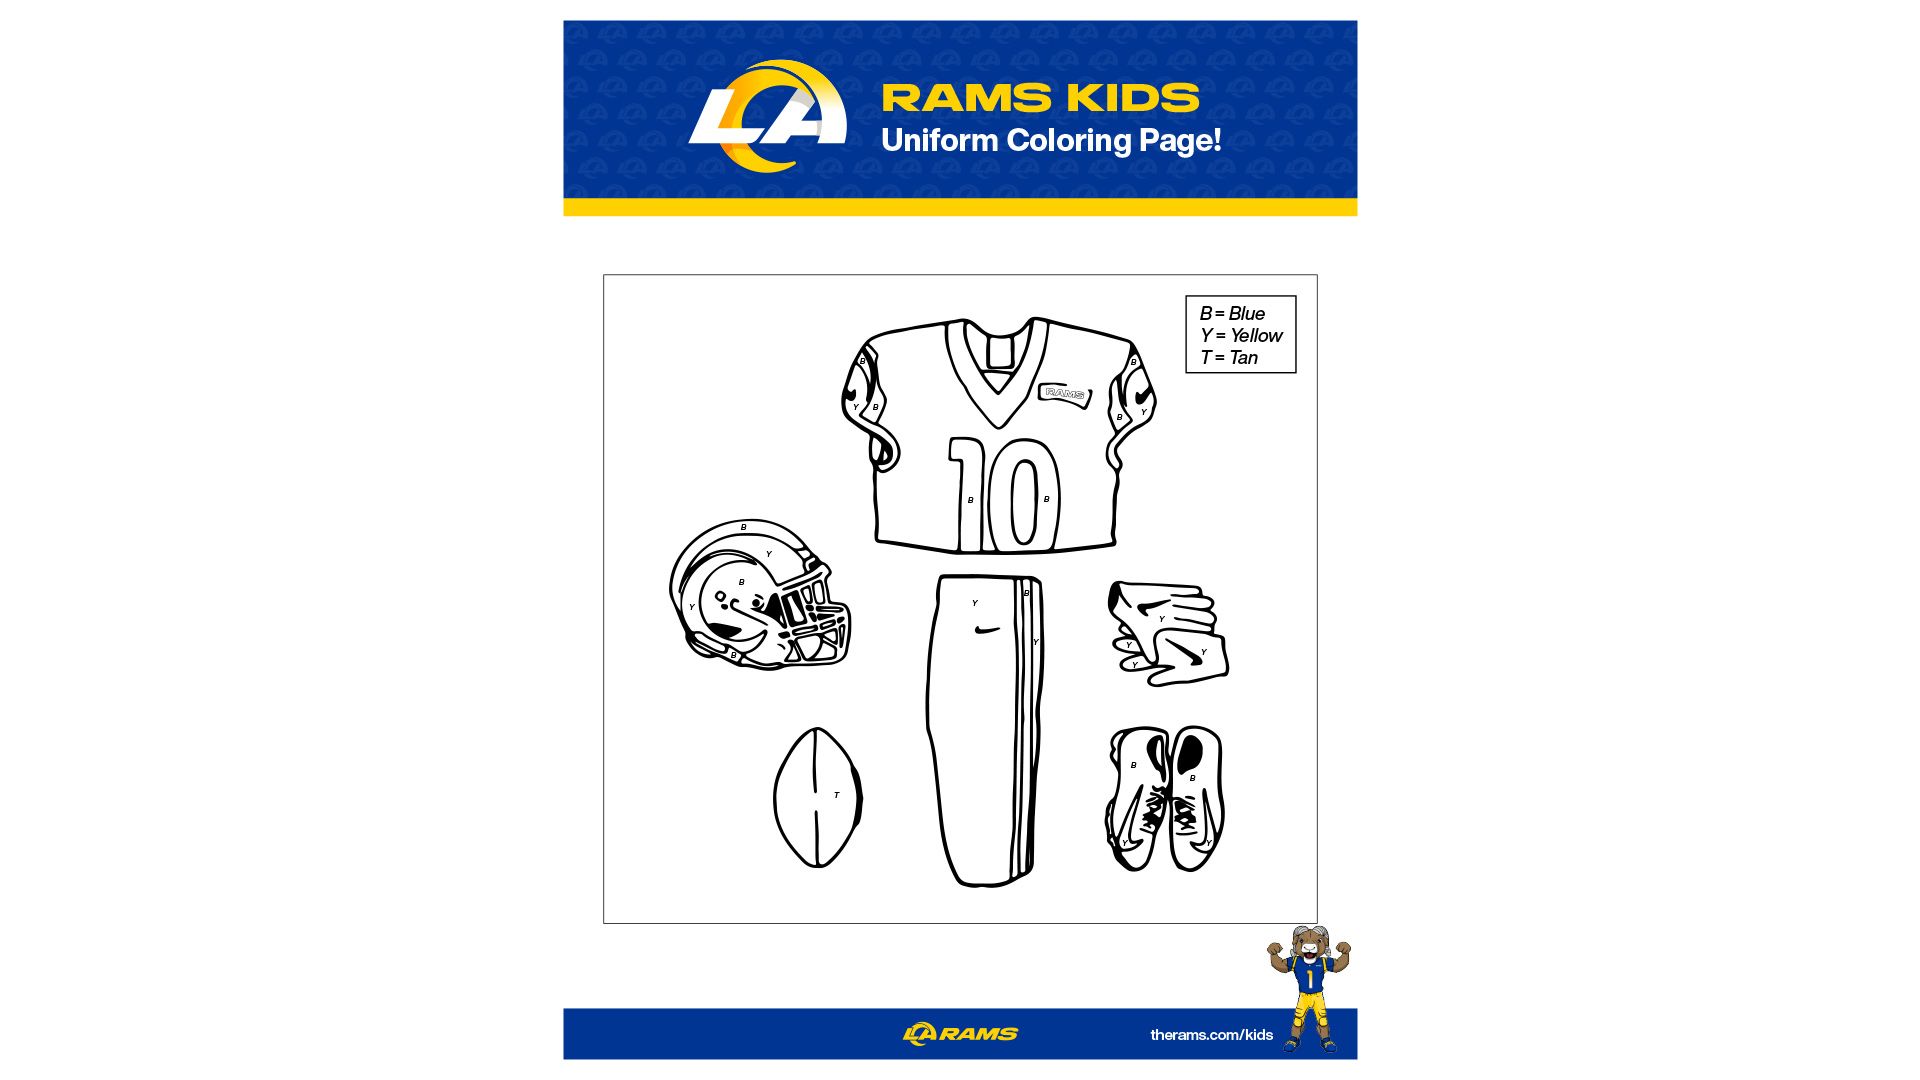 Official Site of the Los Angeles Rams